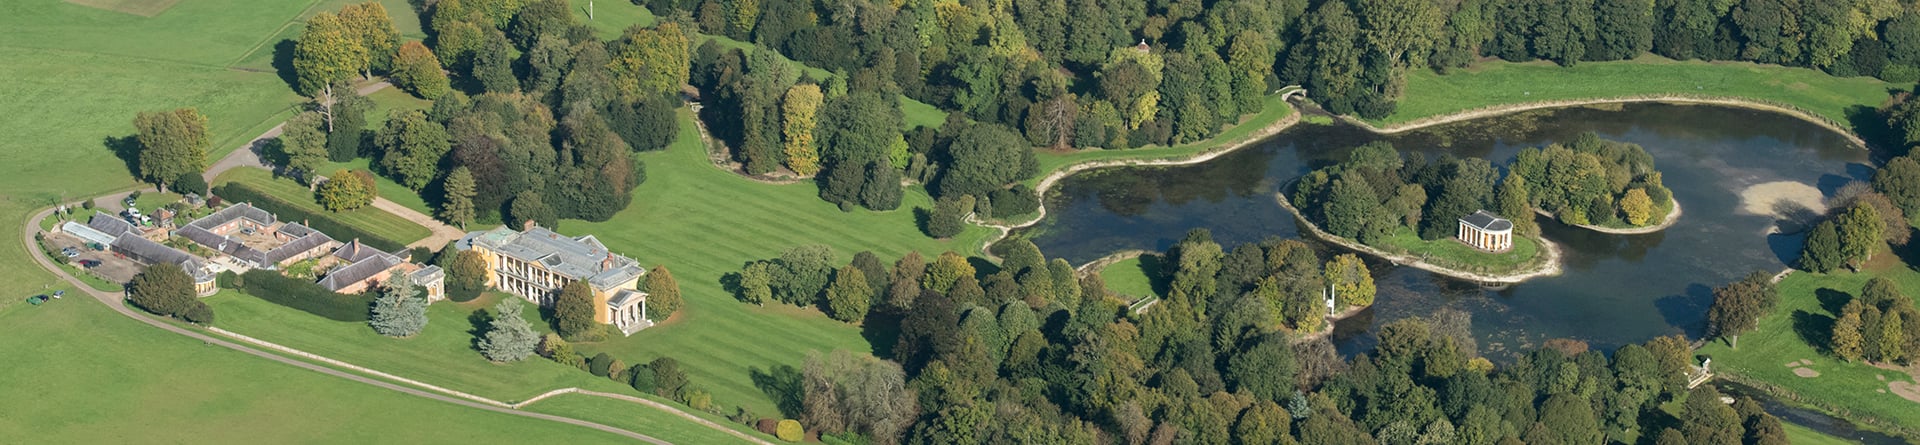 Colour aerial photograph of a country house with landscaped gardens and a lake with some islands, one of which hosts a temple